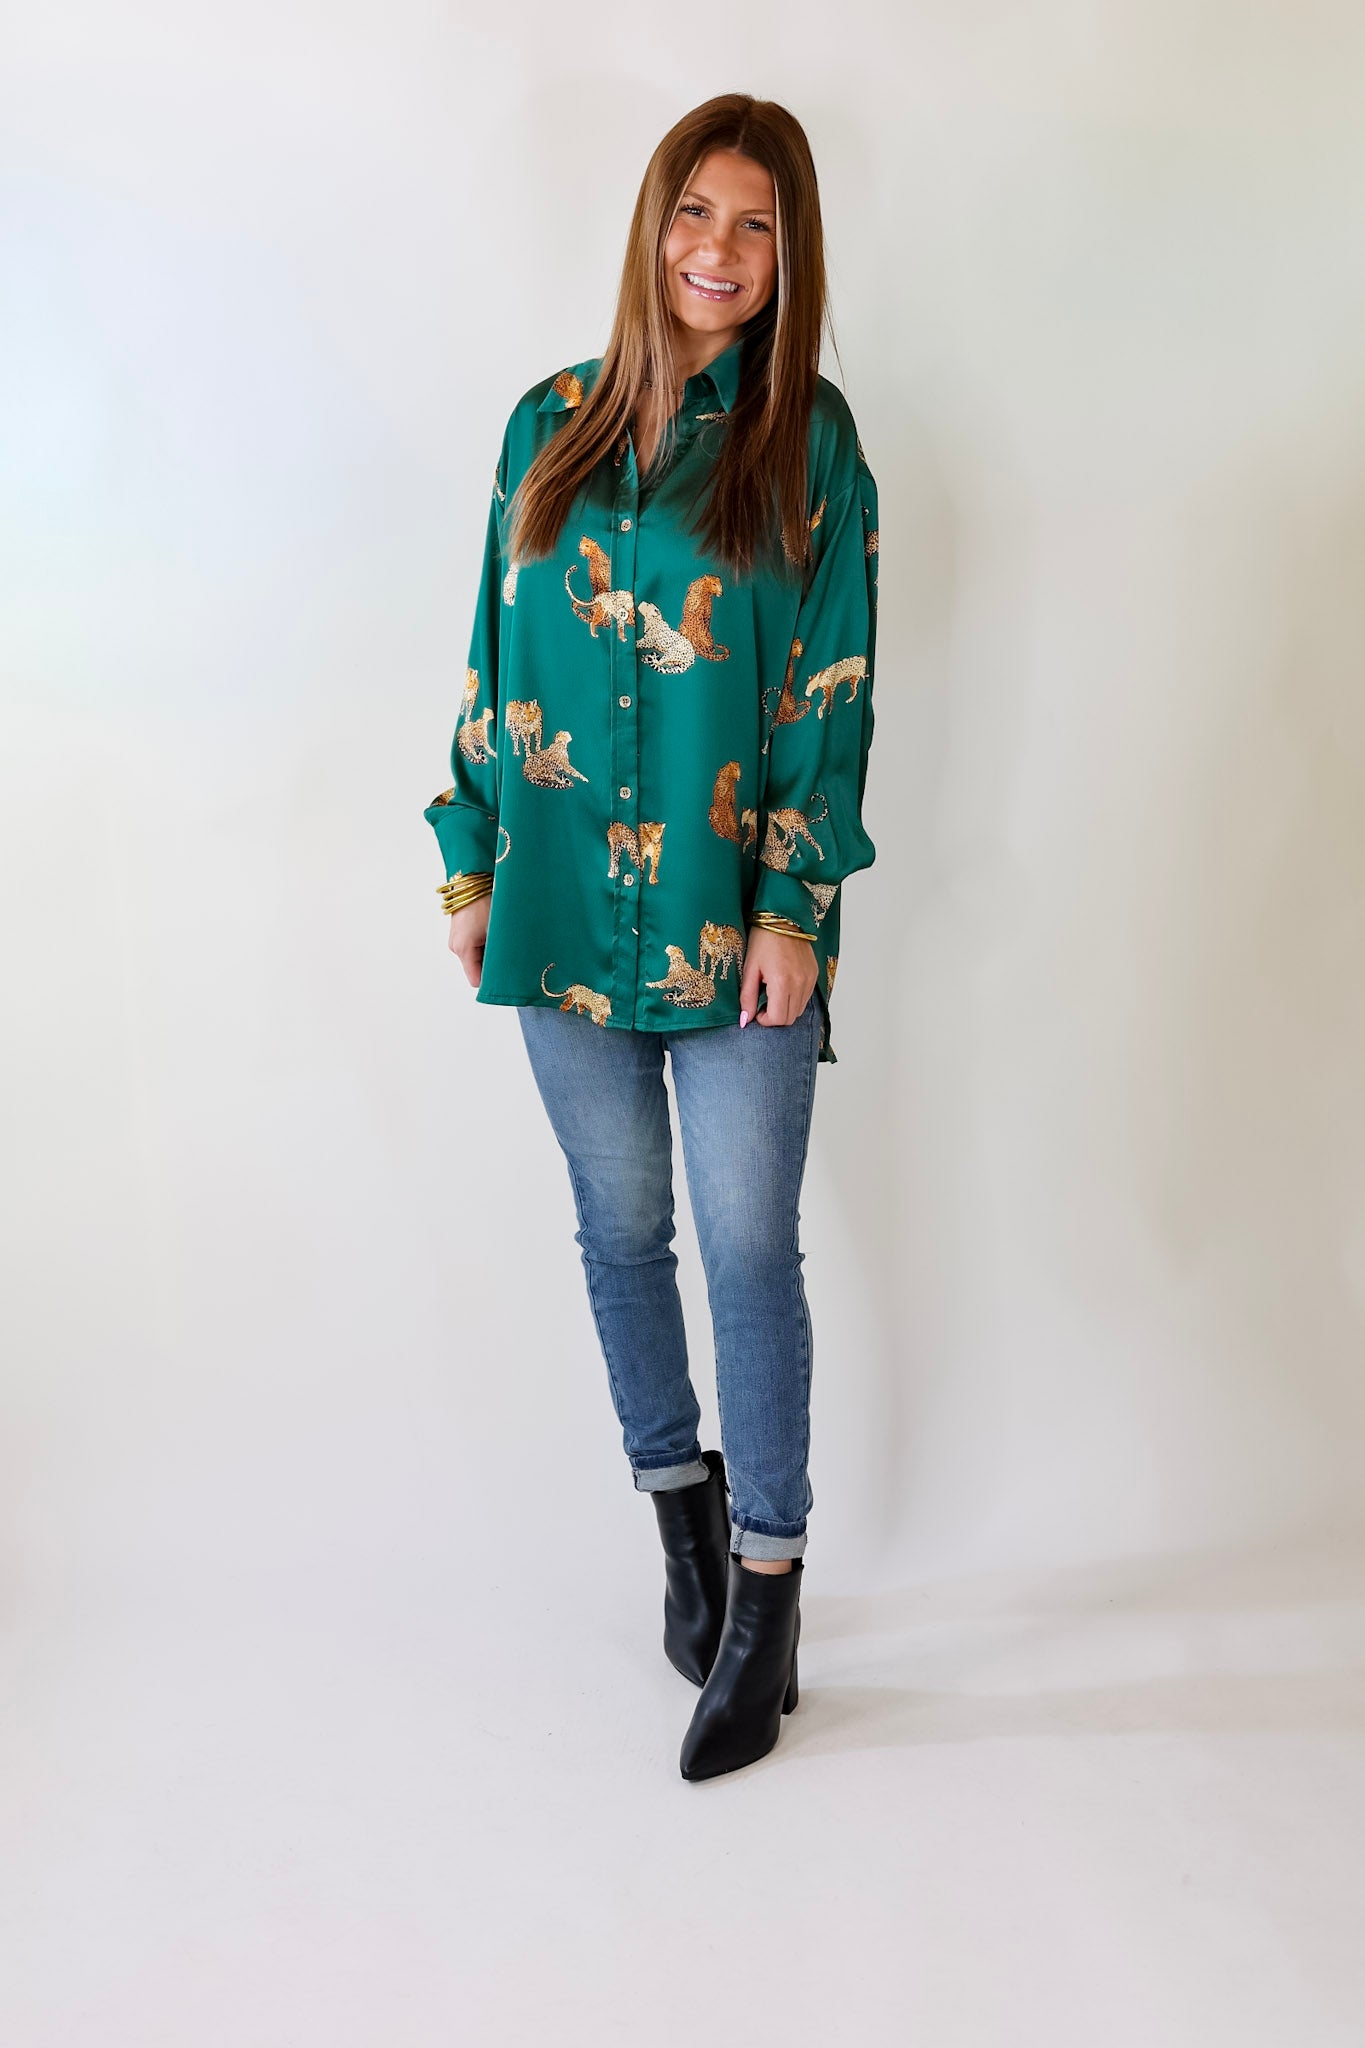 Tell Me Something Good Cheetah Print Long Sleeve Button Up Top in Hunter Green - Giddy Up Glamour Boutique